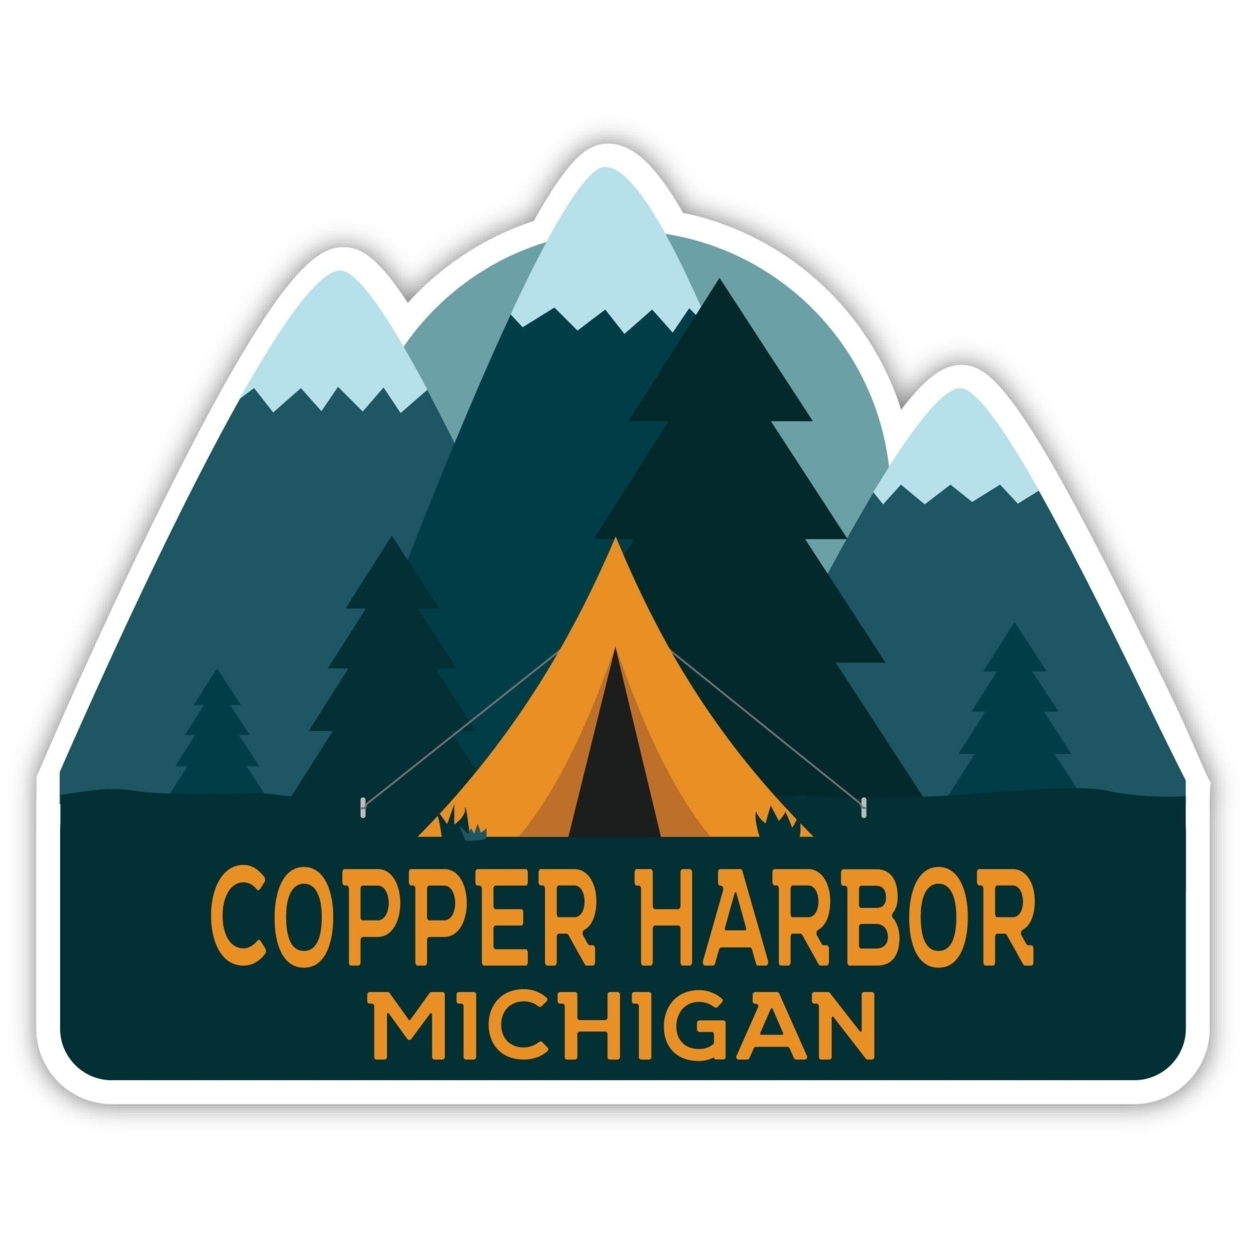 Copper Harbor Michigan Souvenir Decorative Stickers (Choose Theme And Size) - 4-Pack, 12-Inch, Adventures Awaits